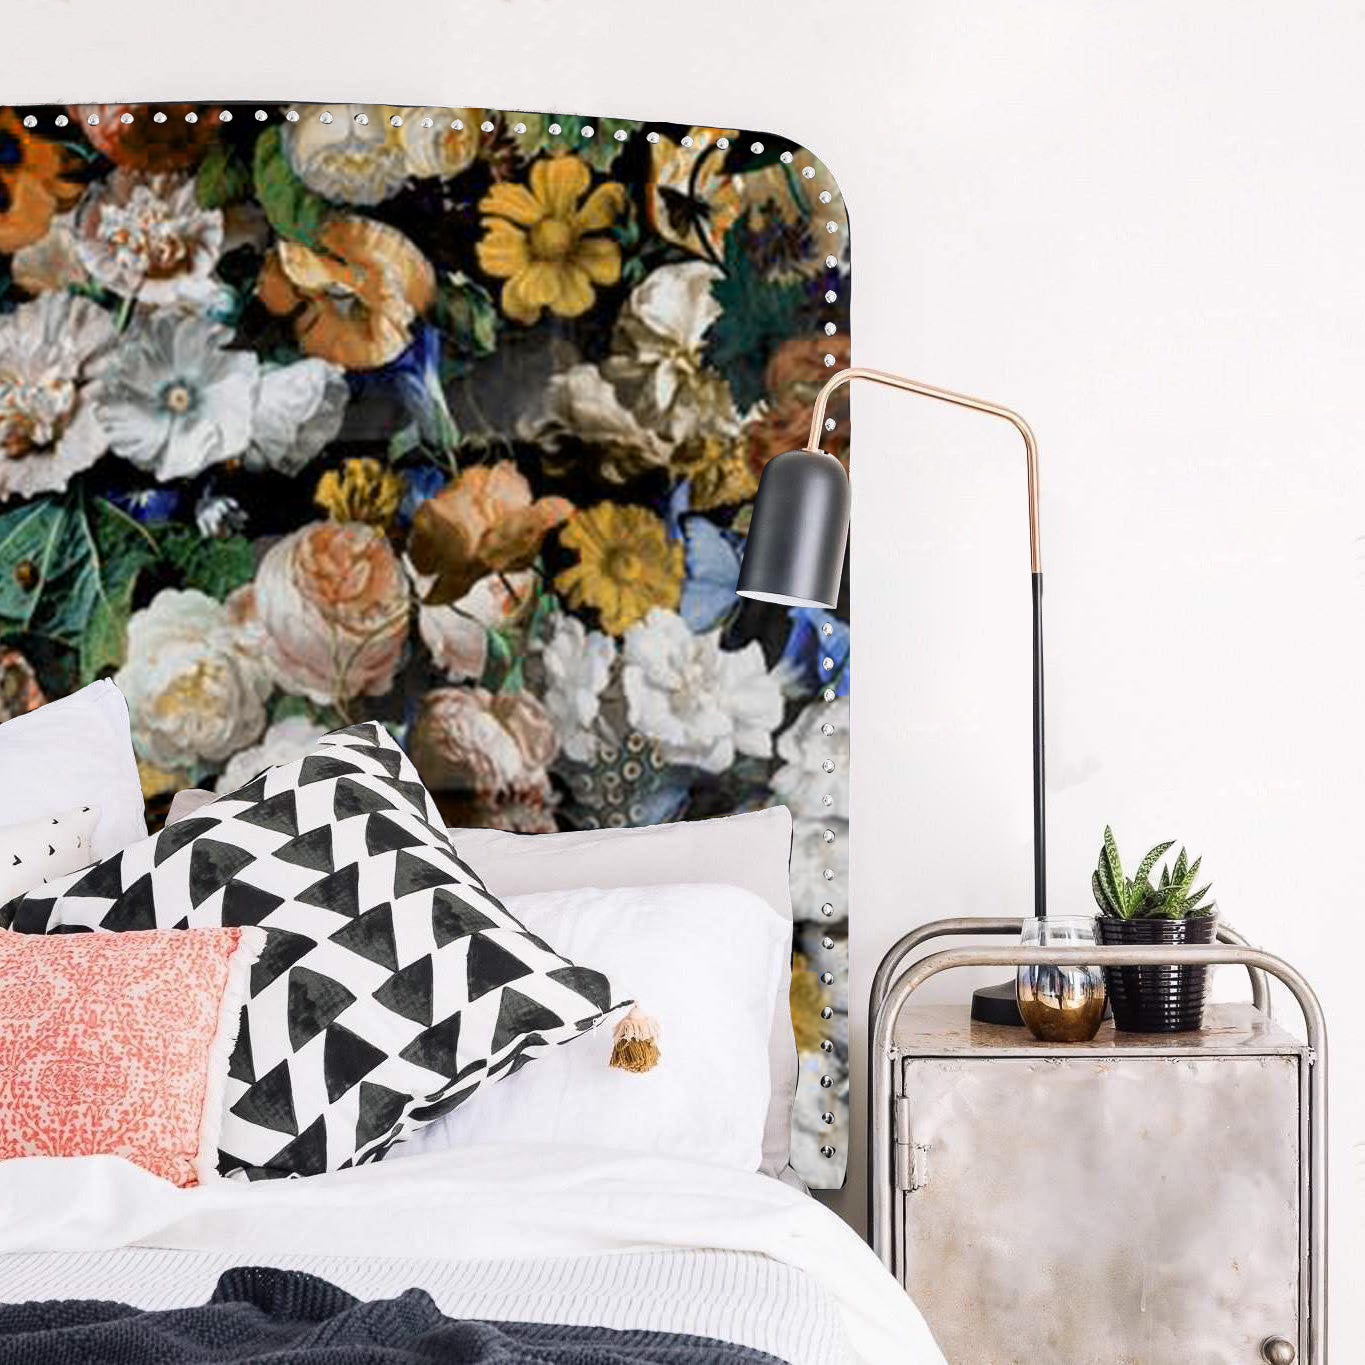 Our simple Curved Rectangle headboard has been given a boost with our bold Flower Bomb printed velvet. It is finished with a row of silver hit-and-miss studs around the edge. As these are all made to order in NZ, please allow 6-8 weeks for production.